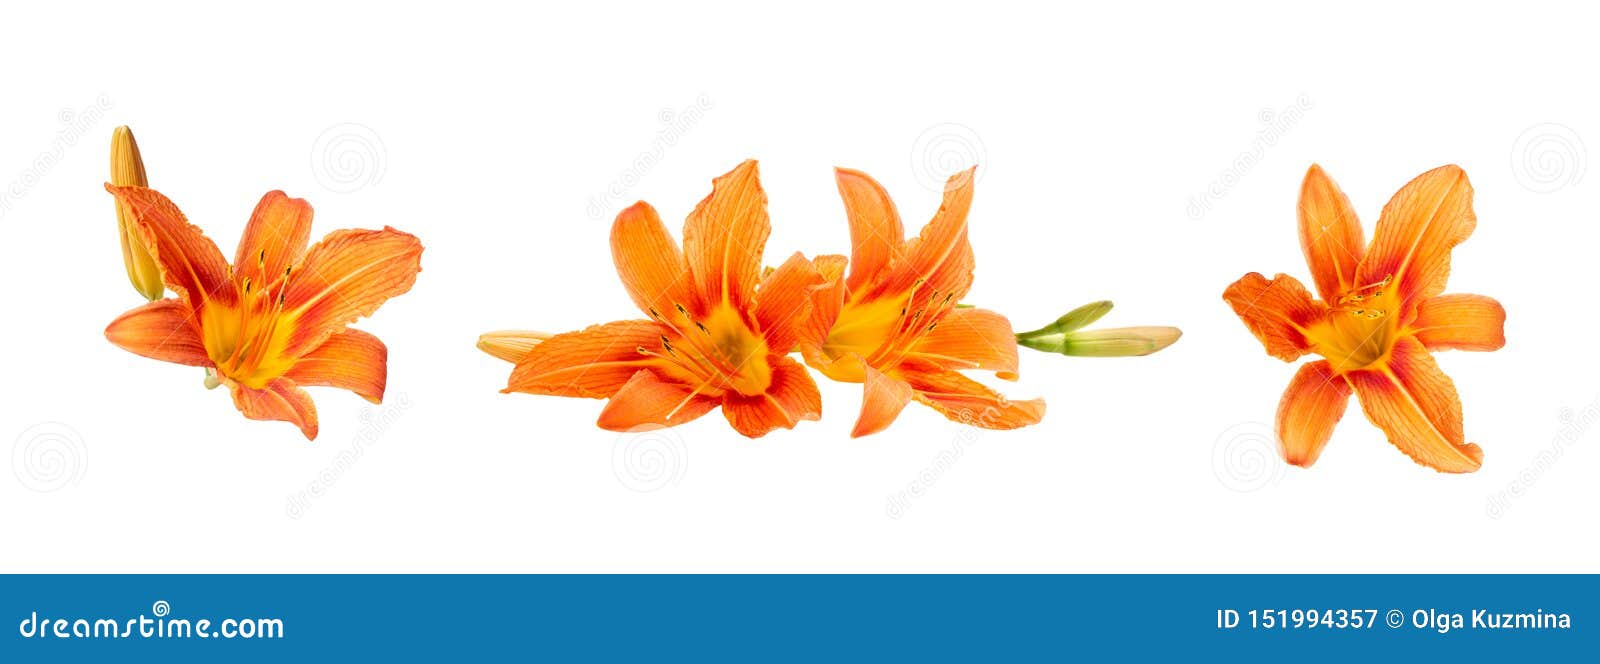 several colors of orange daylily on a white  background. beautiful flowers. decorative items